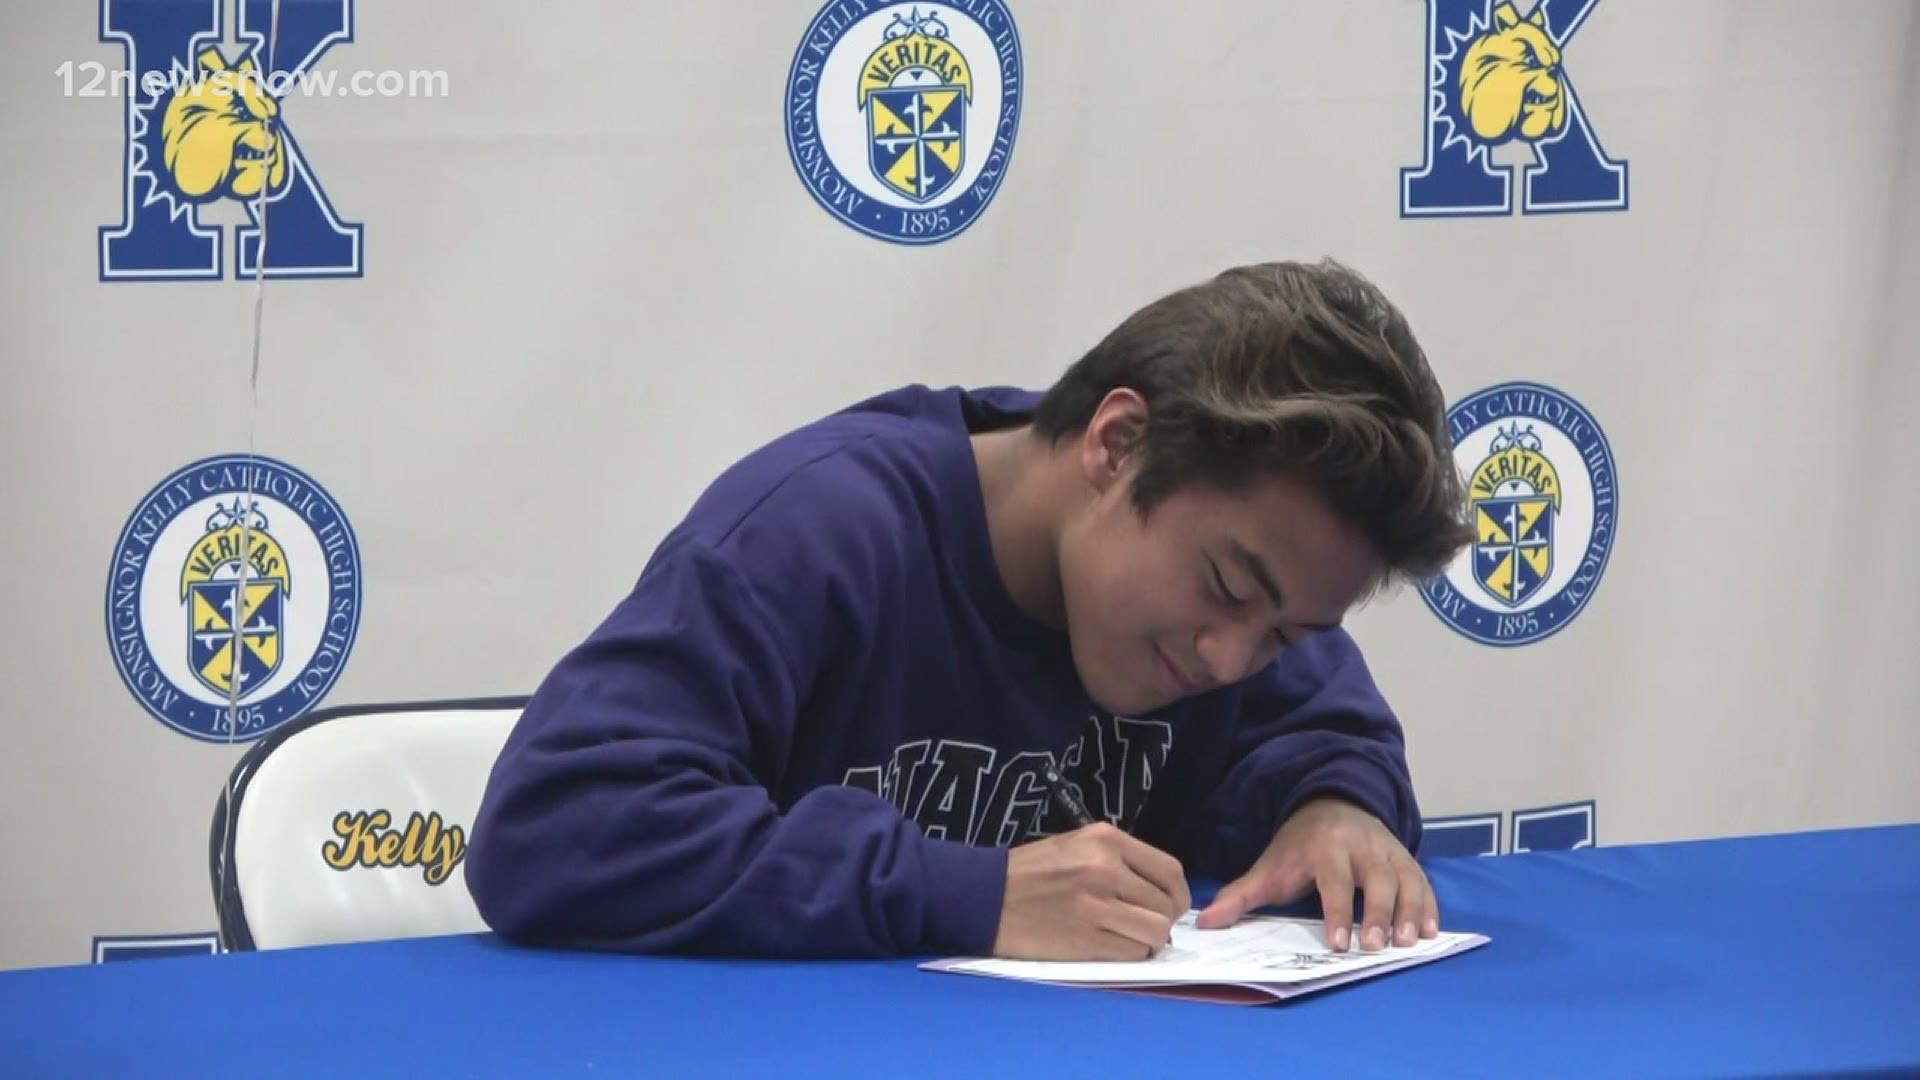 Kelly swimmer signs with Niagara University